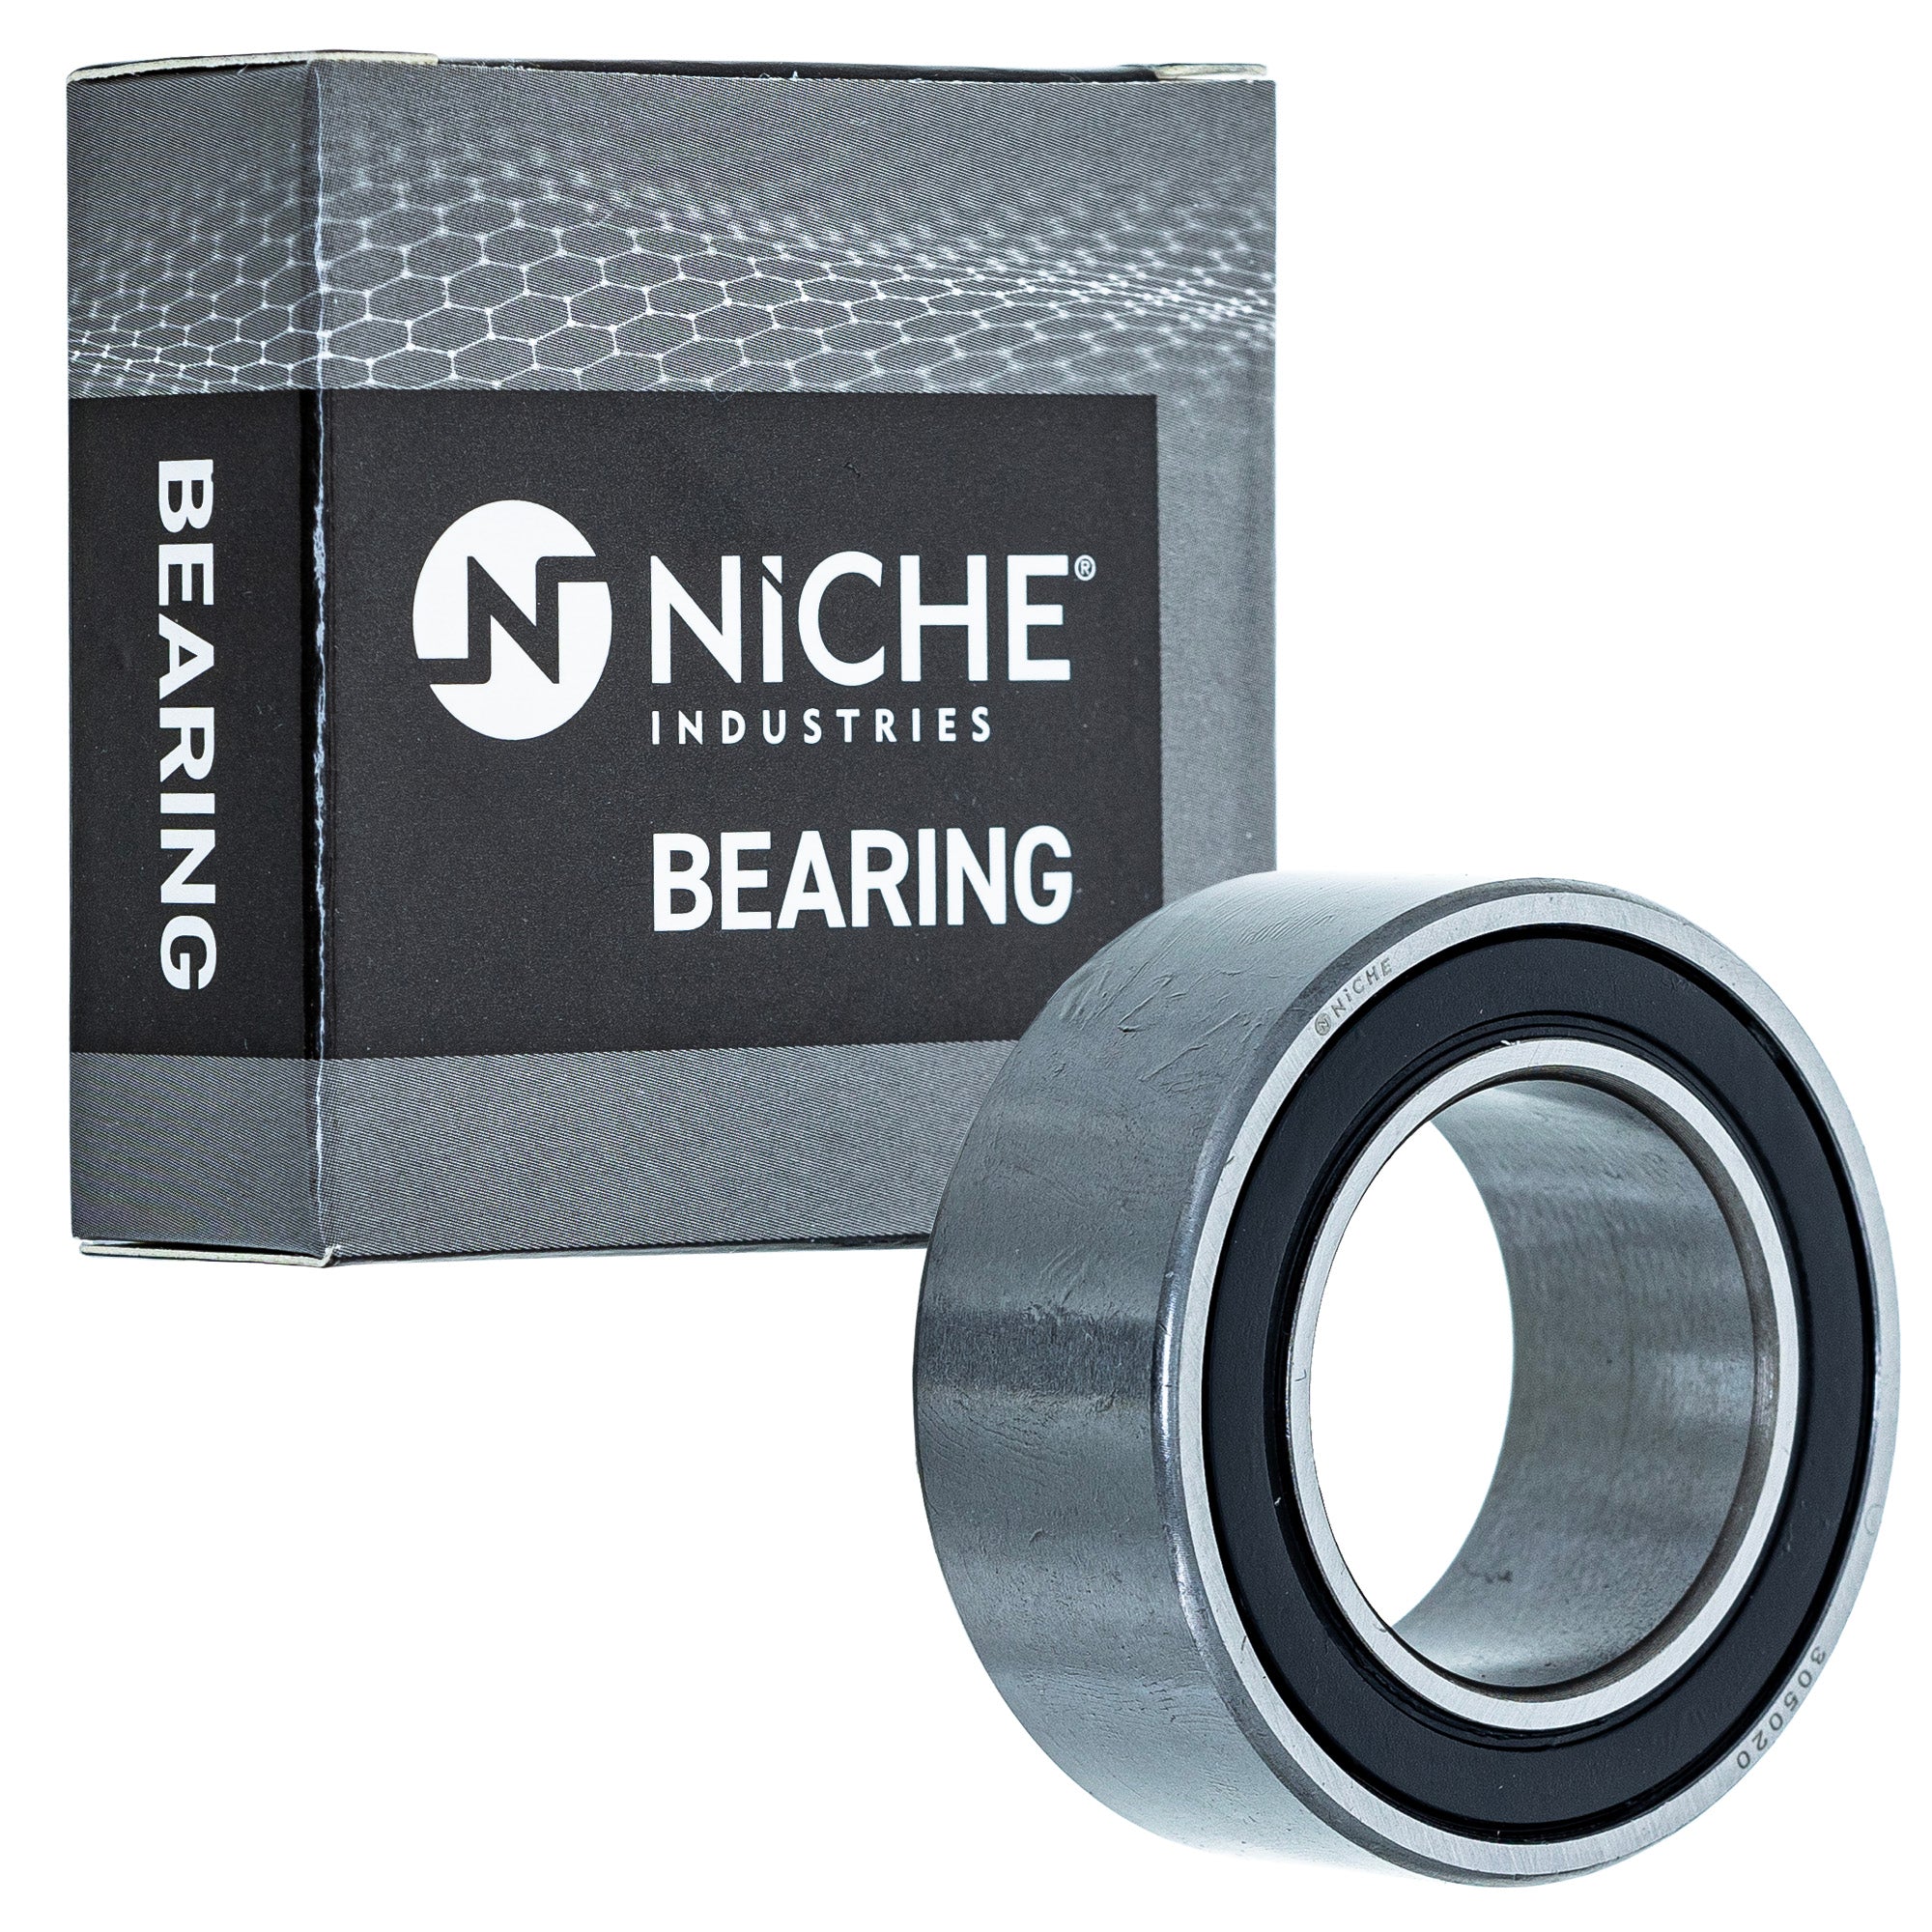 NICHE 519-CBB2241R Bearing 2-Pack for zOTHER Arctic Cat Textron